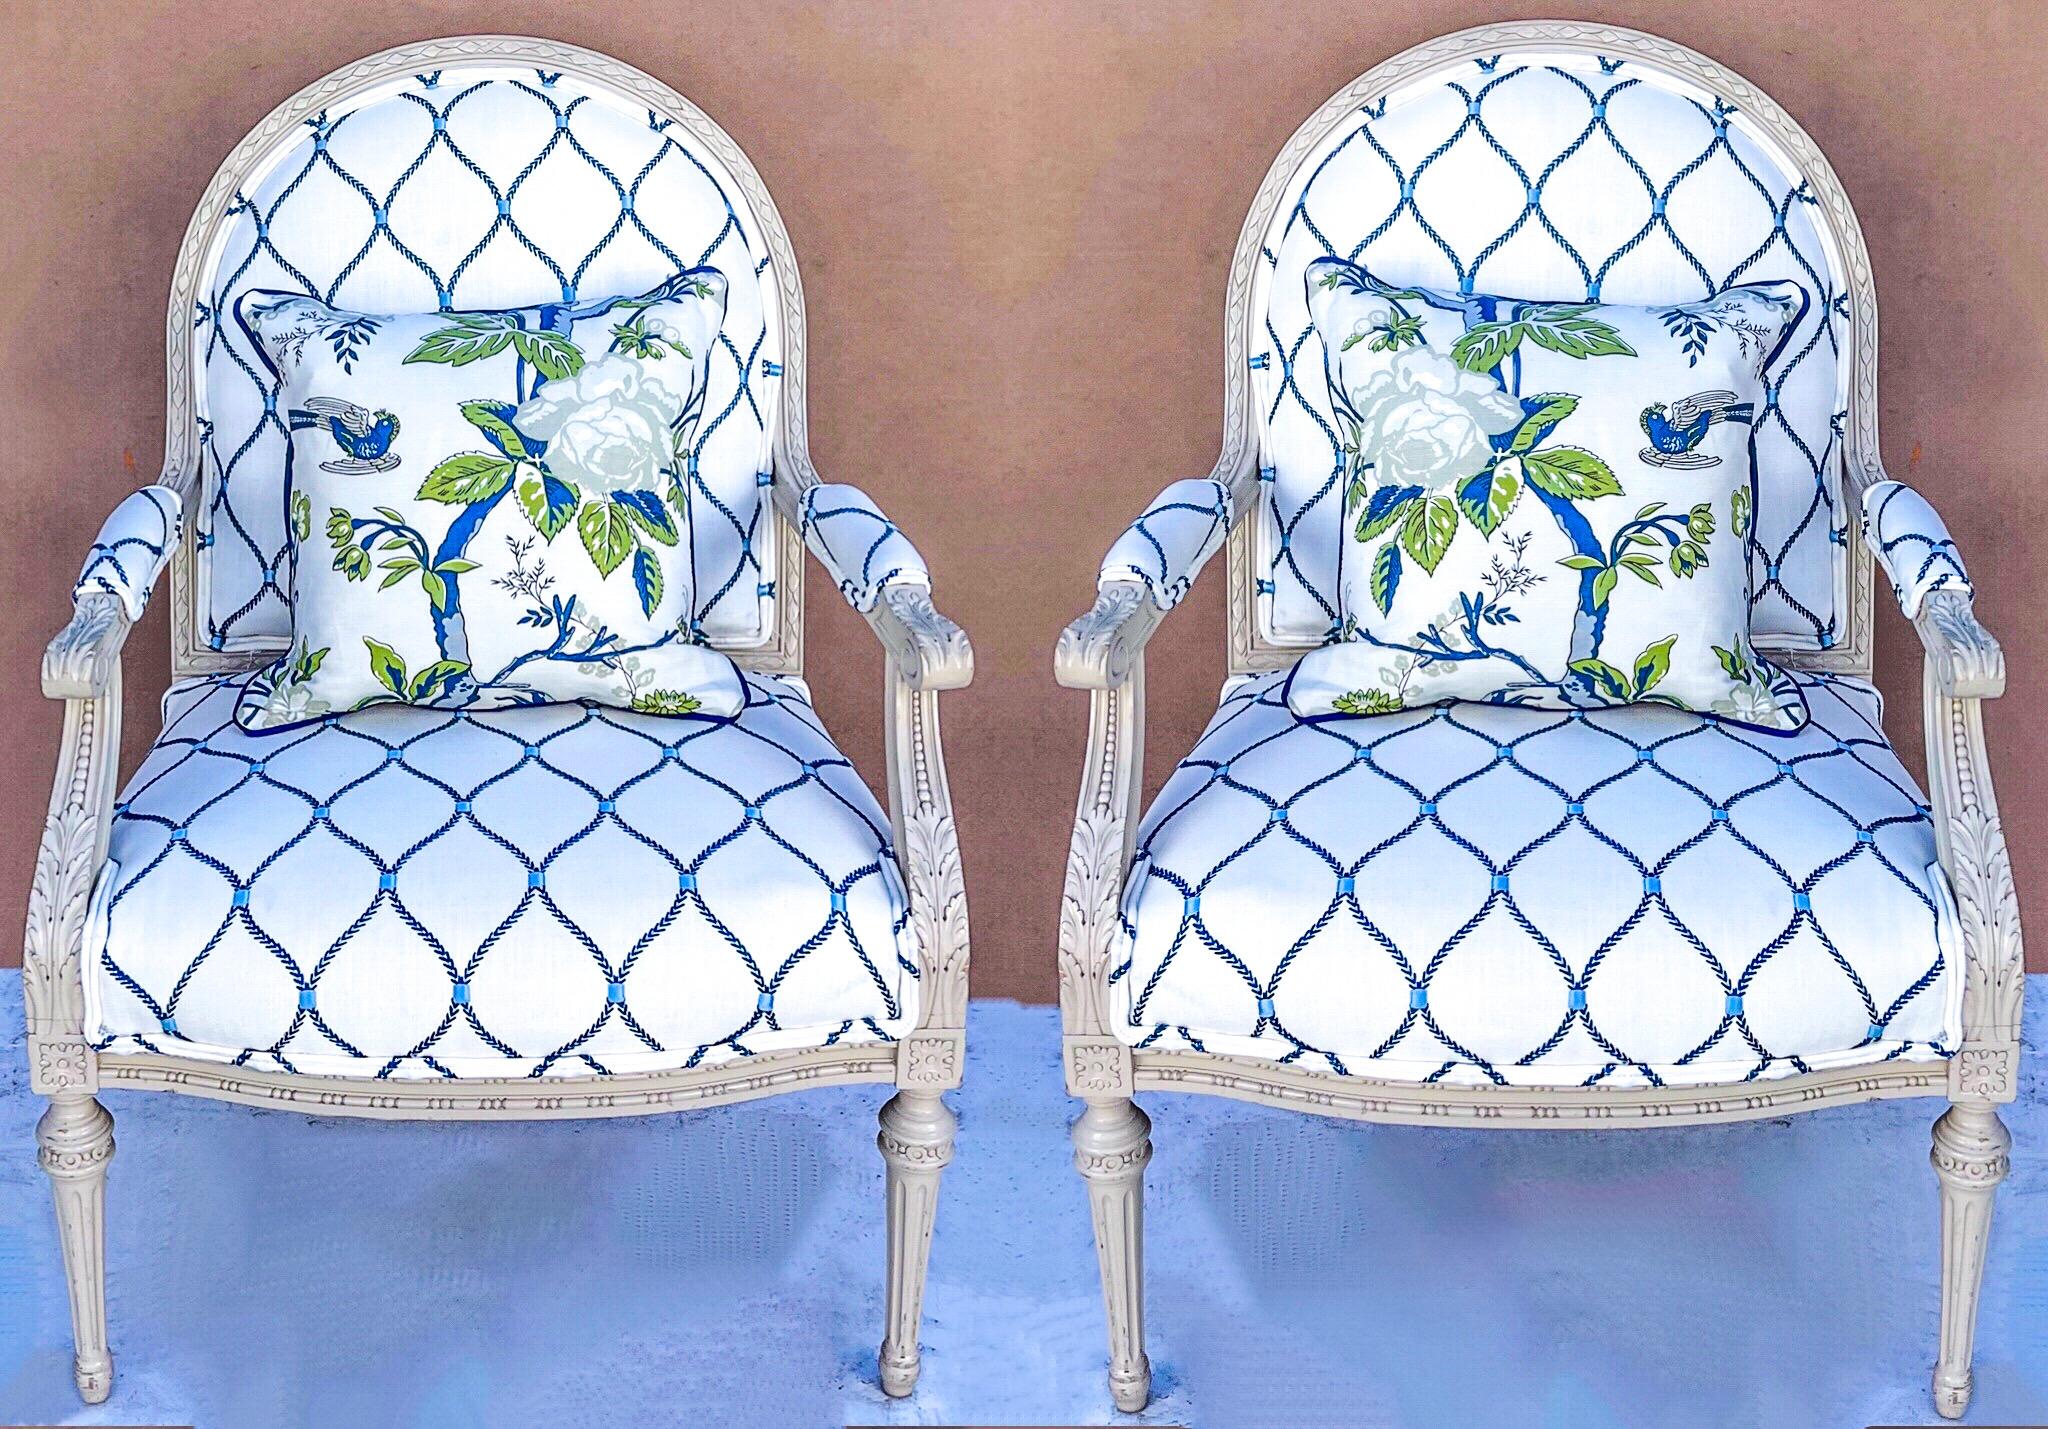 These check all the boxes! They are are pair of French Louis XV style bergere chairs that have been reupholstered and accessorized with a down pillow in a Travers fabric. The chair fabric is an embroidered cotton-linen blend. The pillow is a fresh